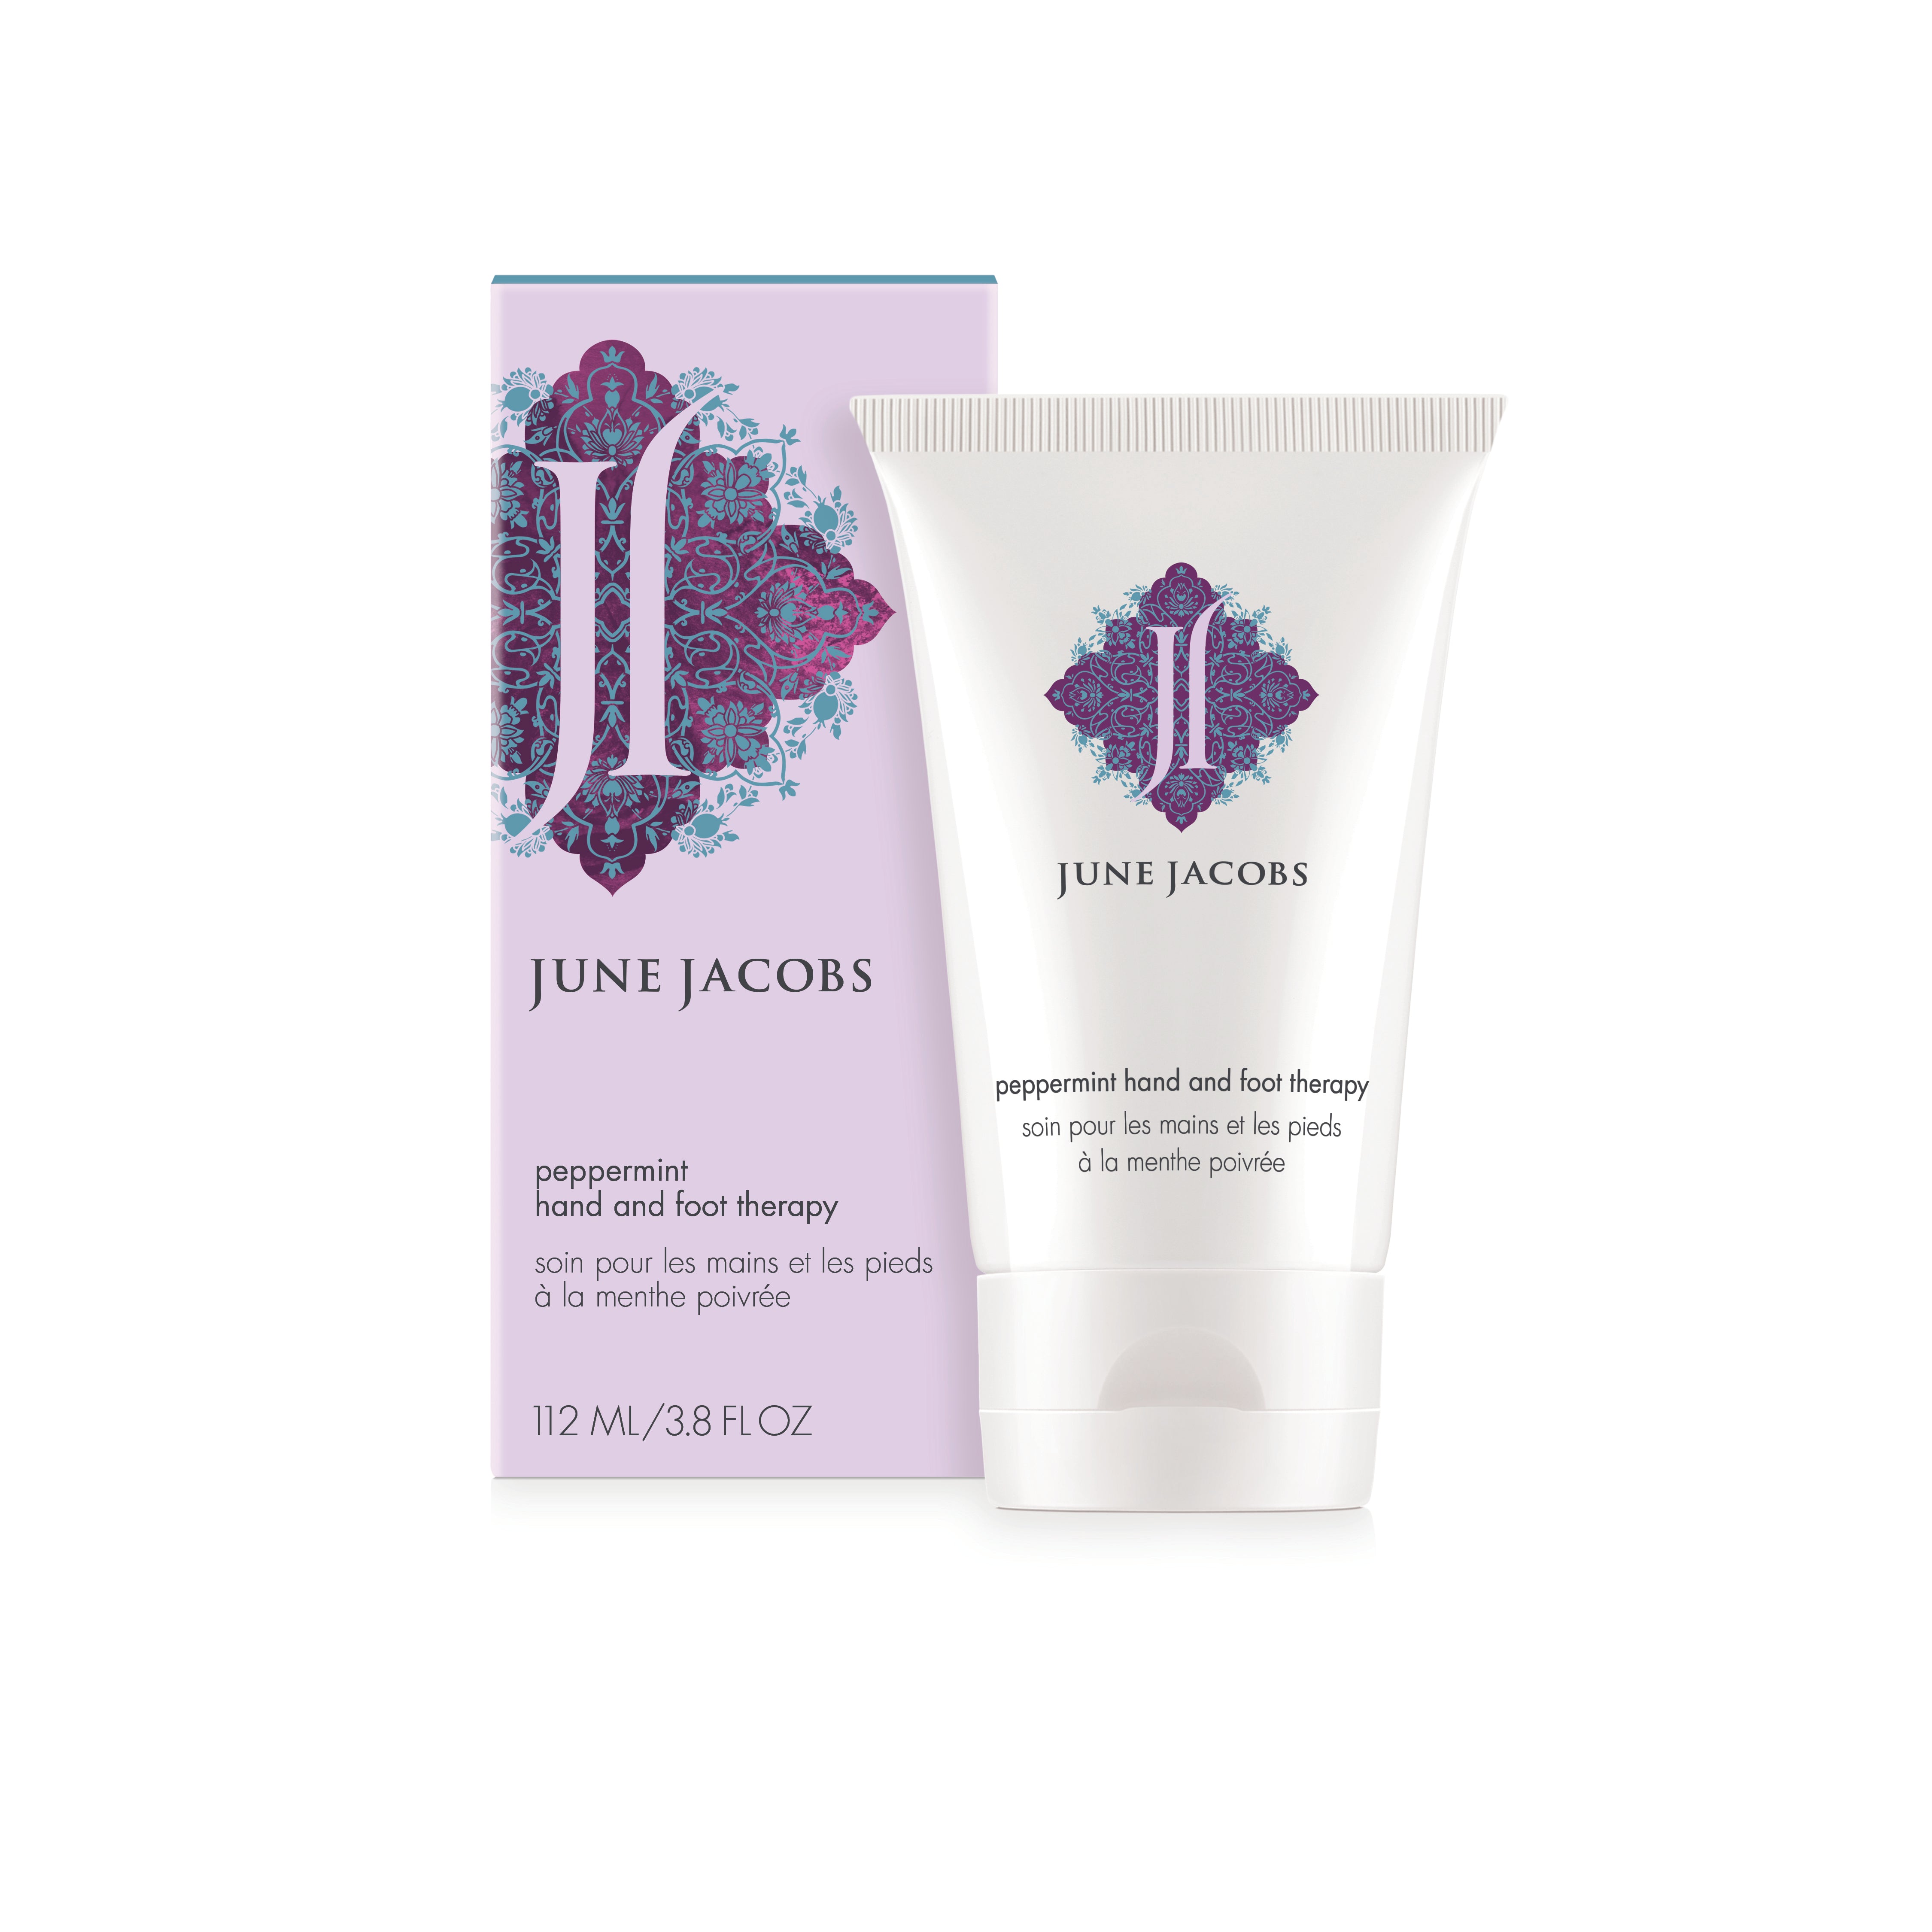 June Jacobs Peppermint Hand And Foot Therapy 3.9oz